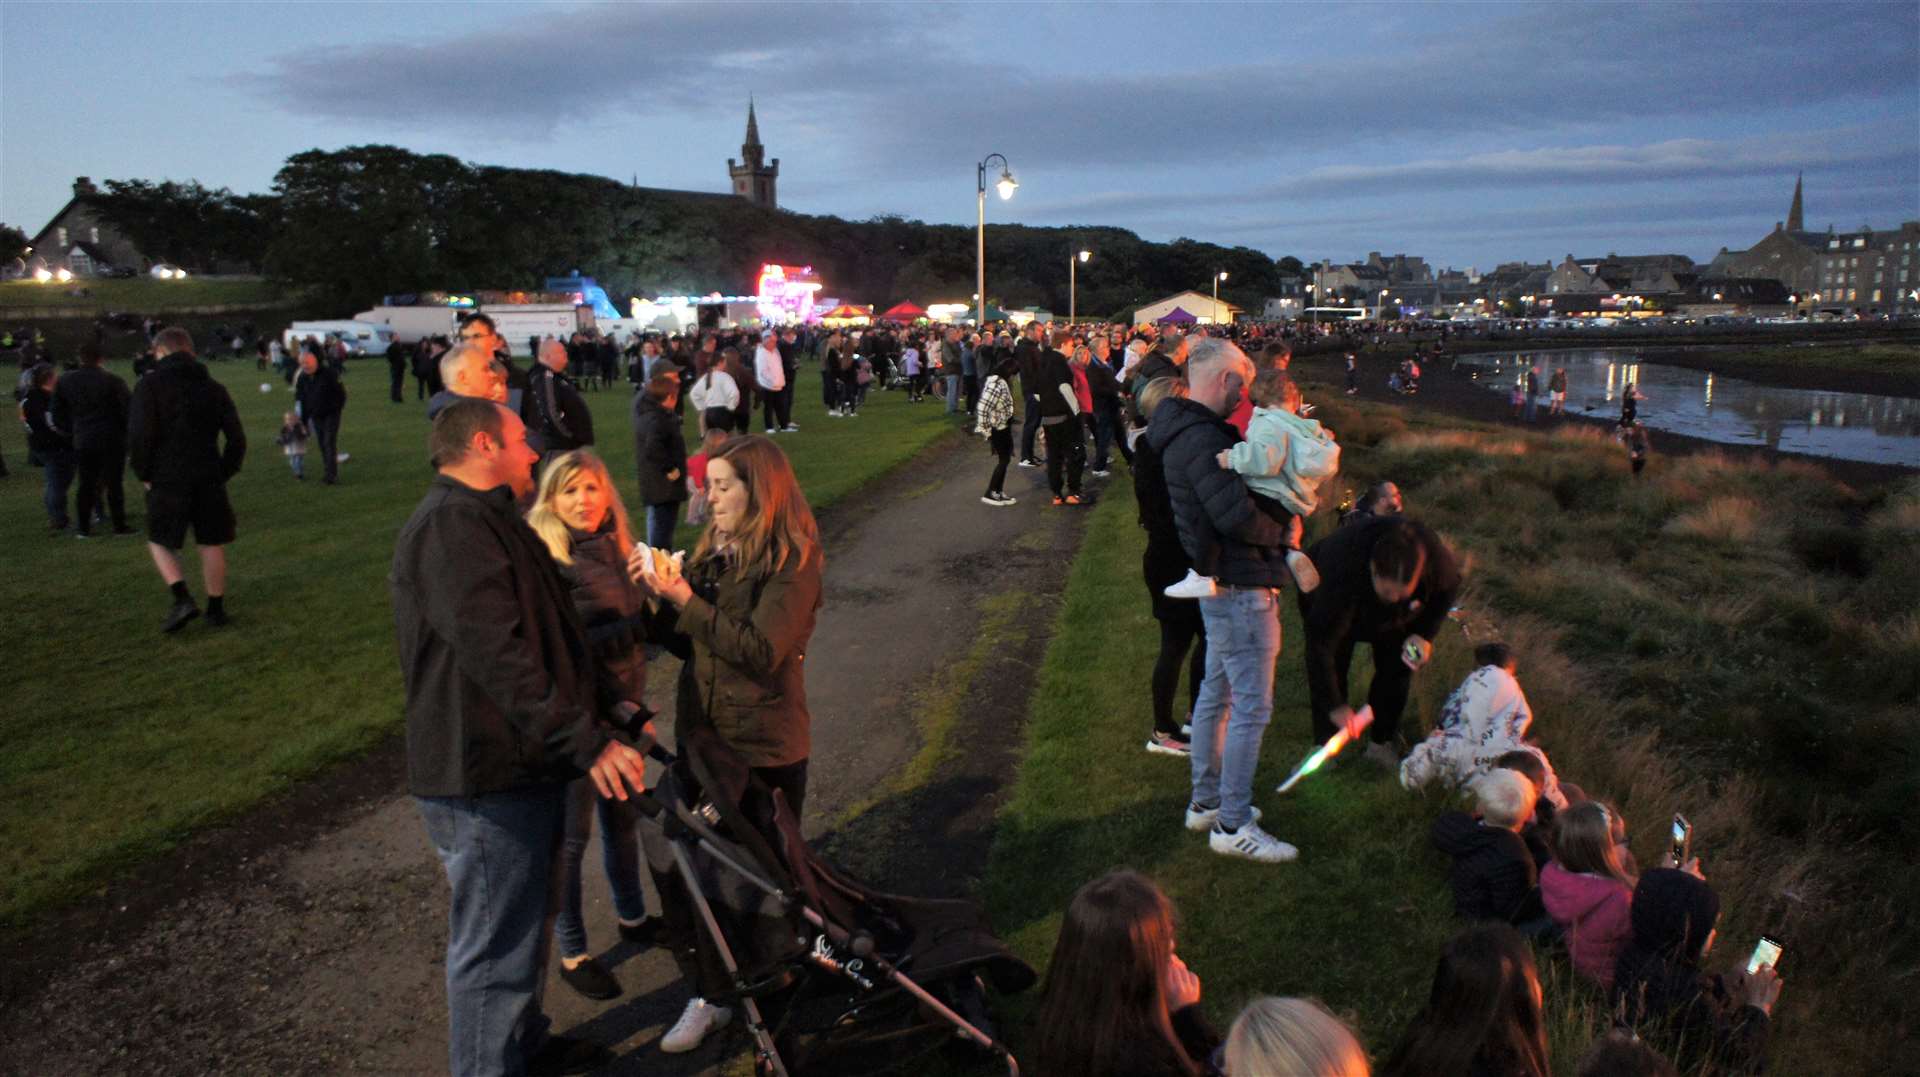 Hundreds of people turned up for the annual display of fireworks. Picture: DGS